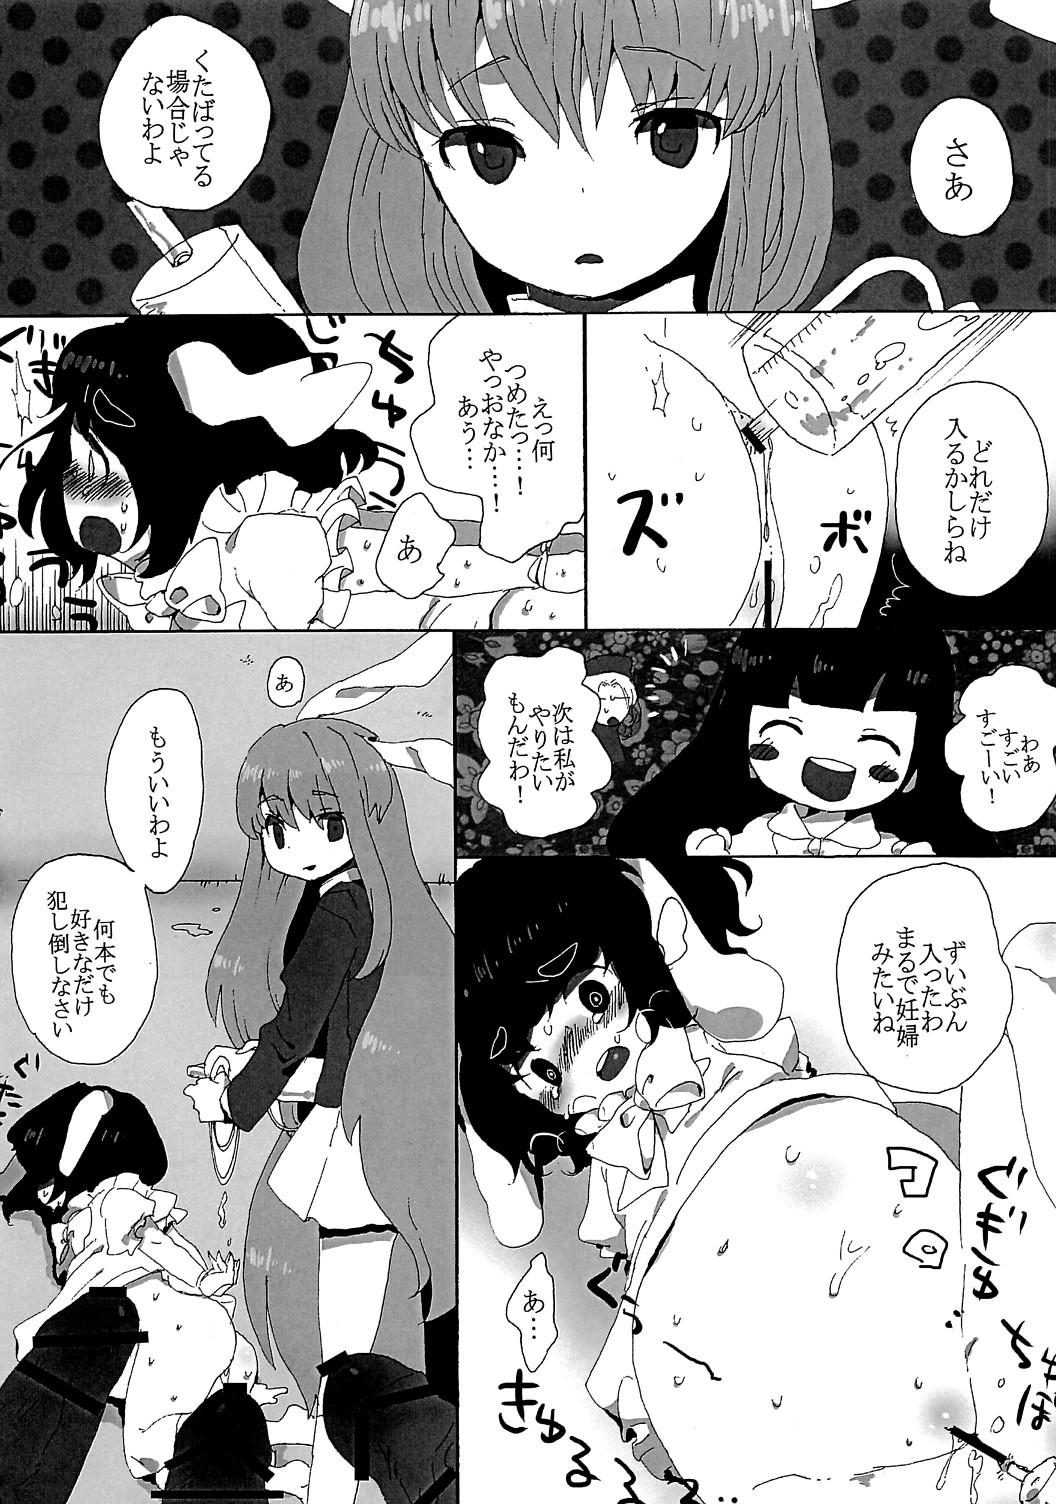 Culito rumor the second - Touhou project Oriental - Page 8